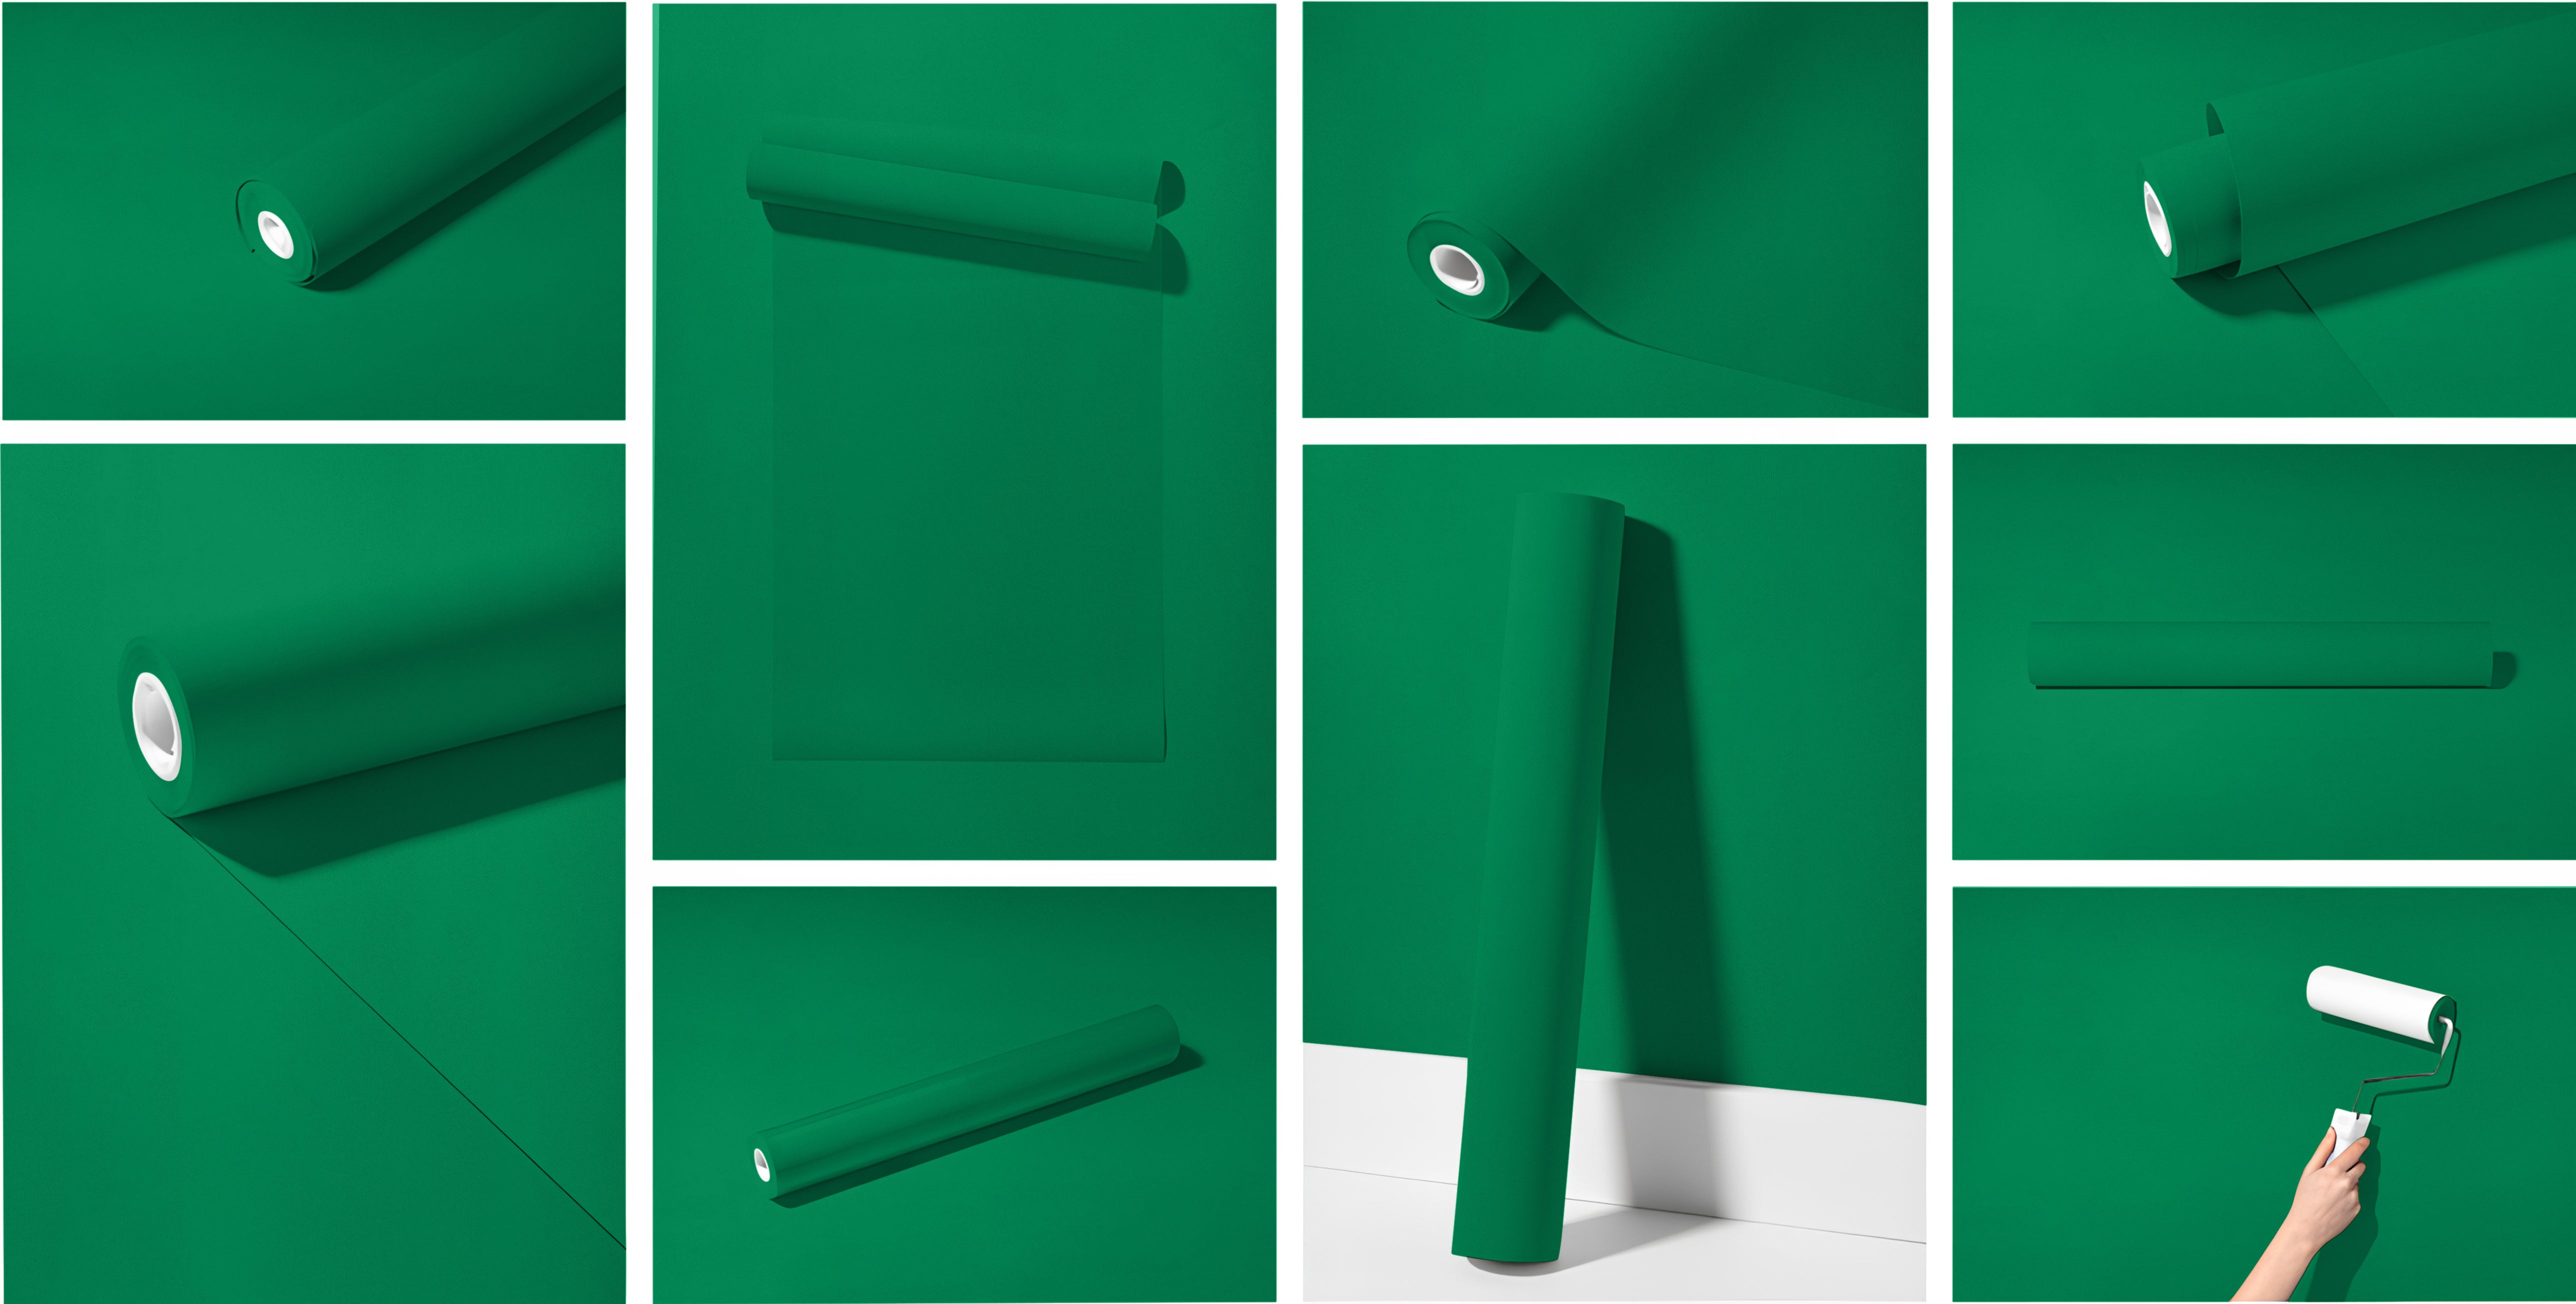 Peel & Stick Removable Re-usable Paint - Color RAL 6024 Traffic Green - offRAL™ - RALRAW LLC, USA